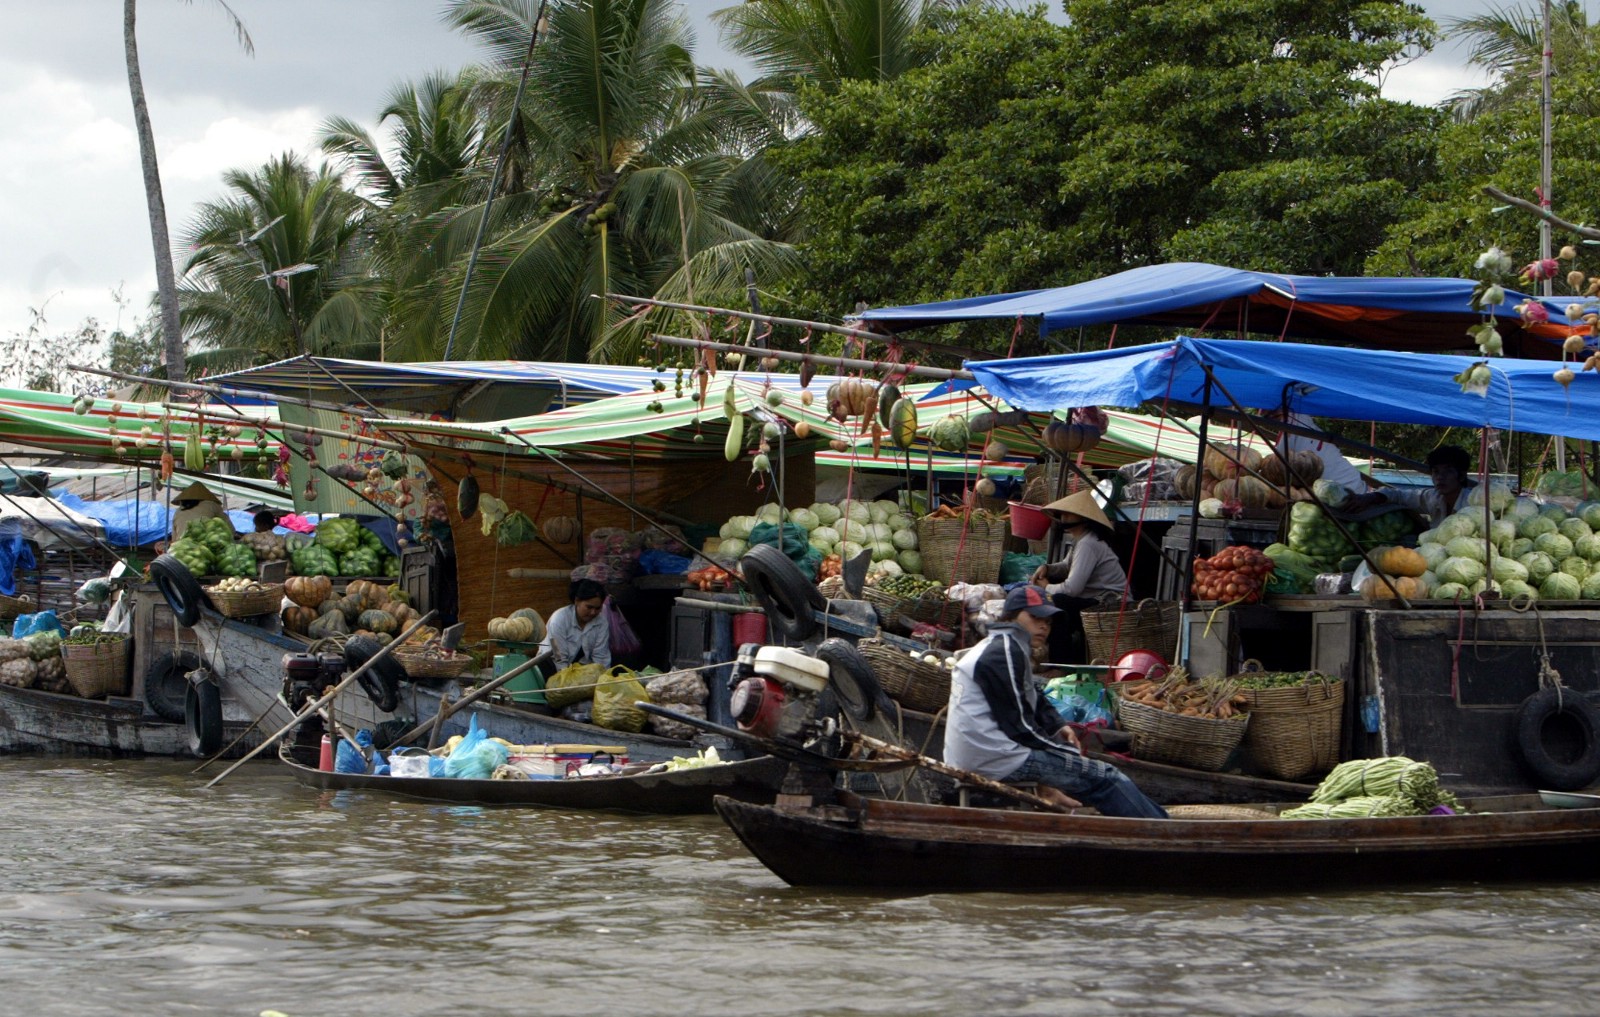 Boats loaded with fruits and vegetables on the Mekong river.